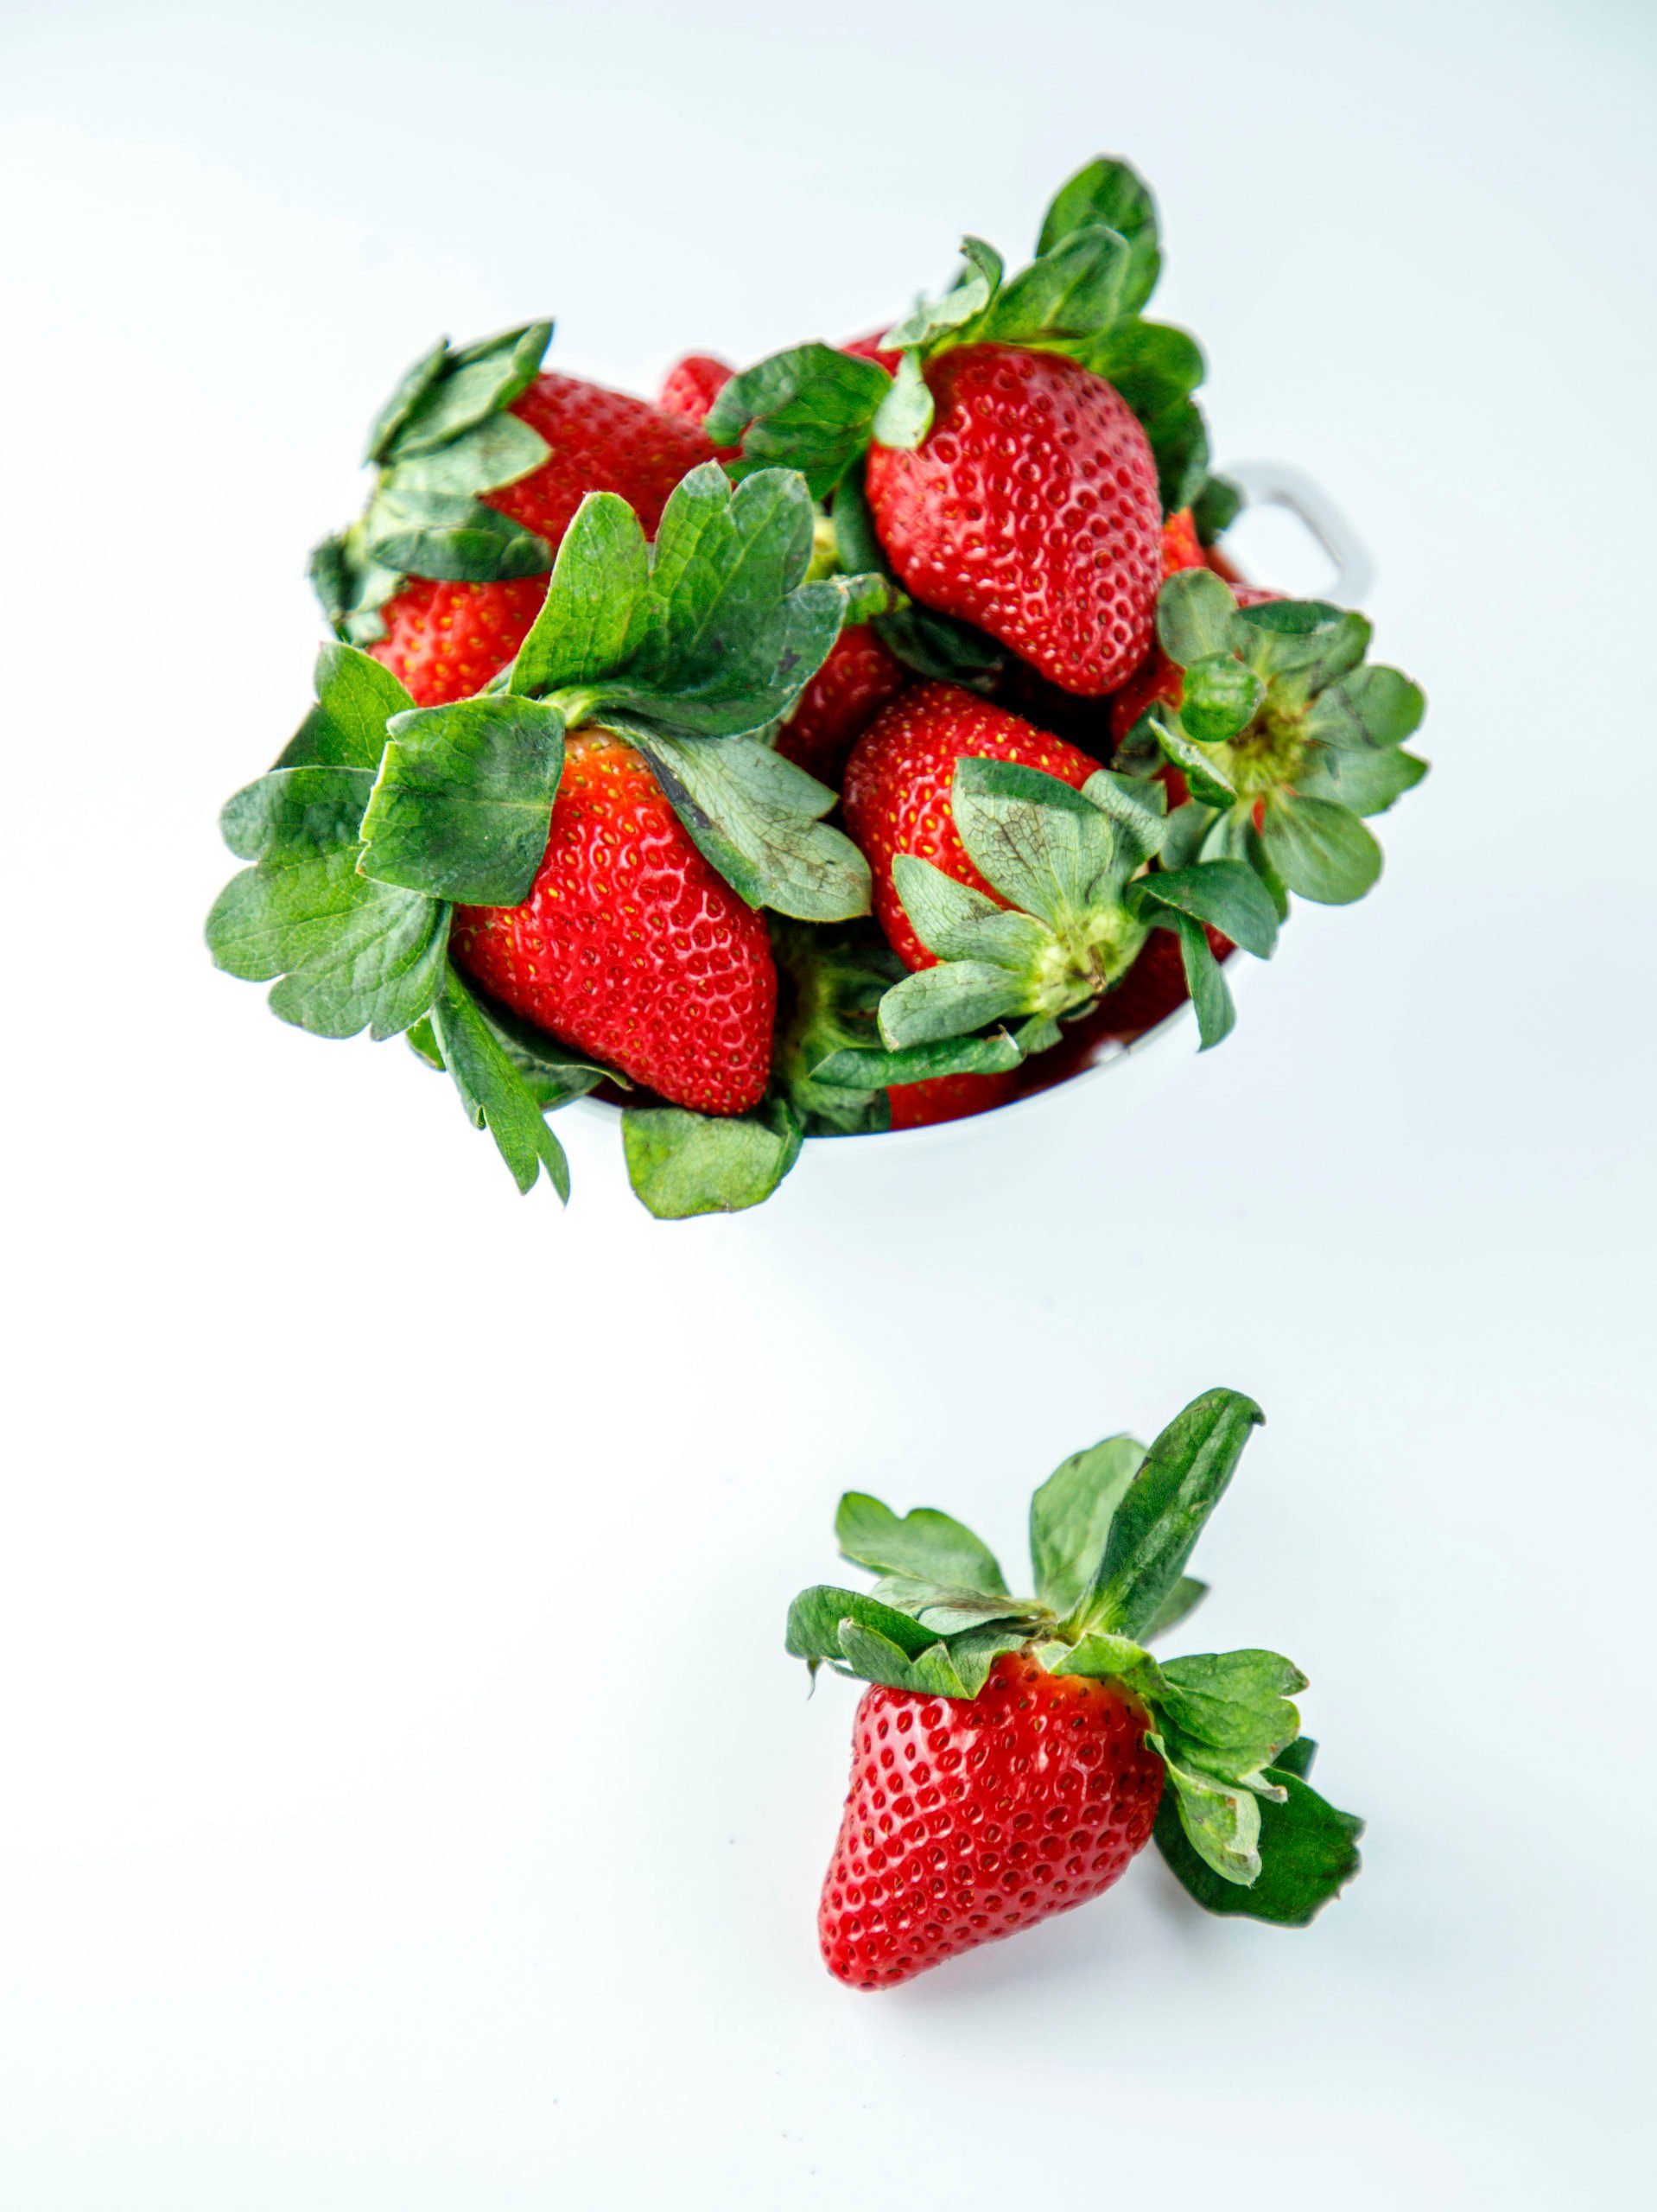 Fresh strawberries in a white colander on a white background